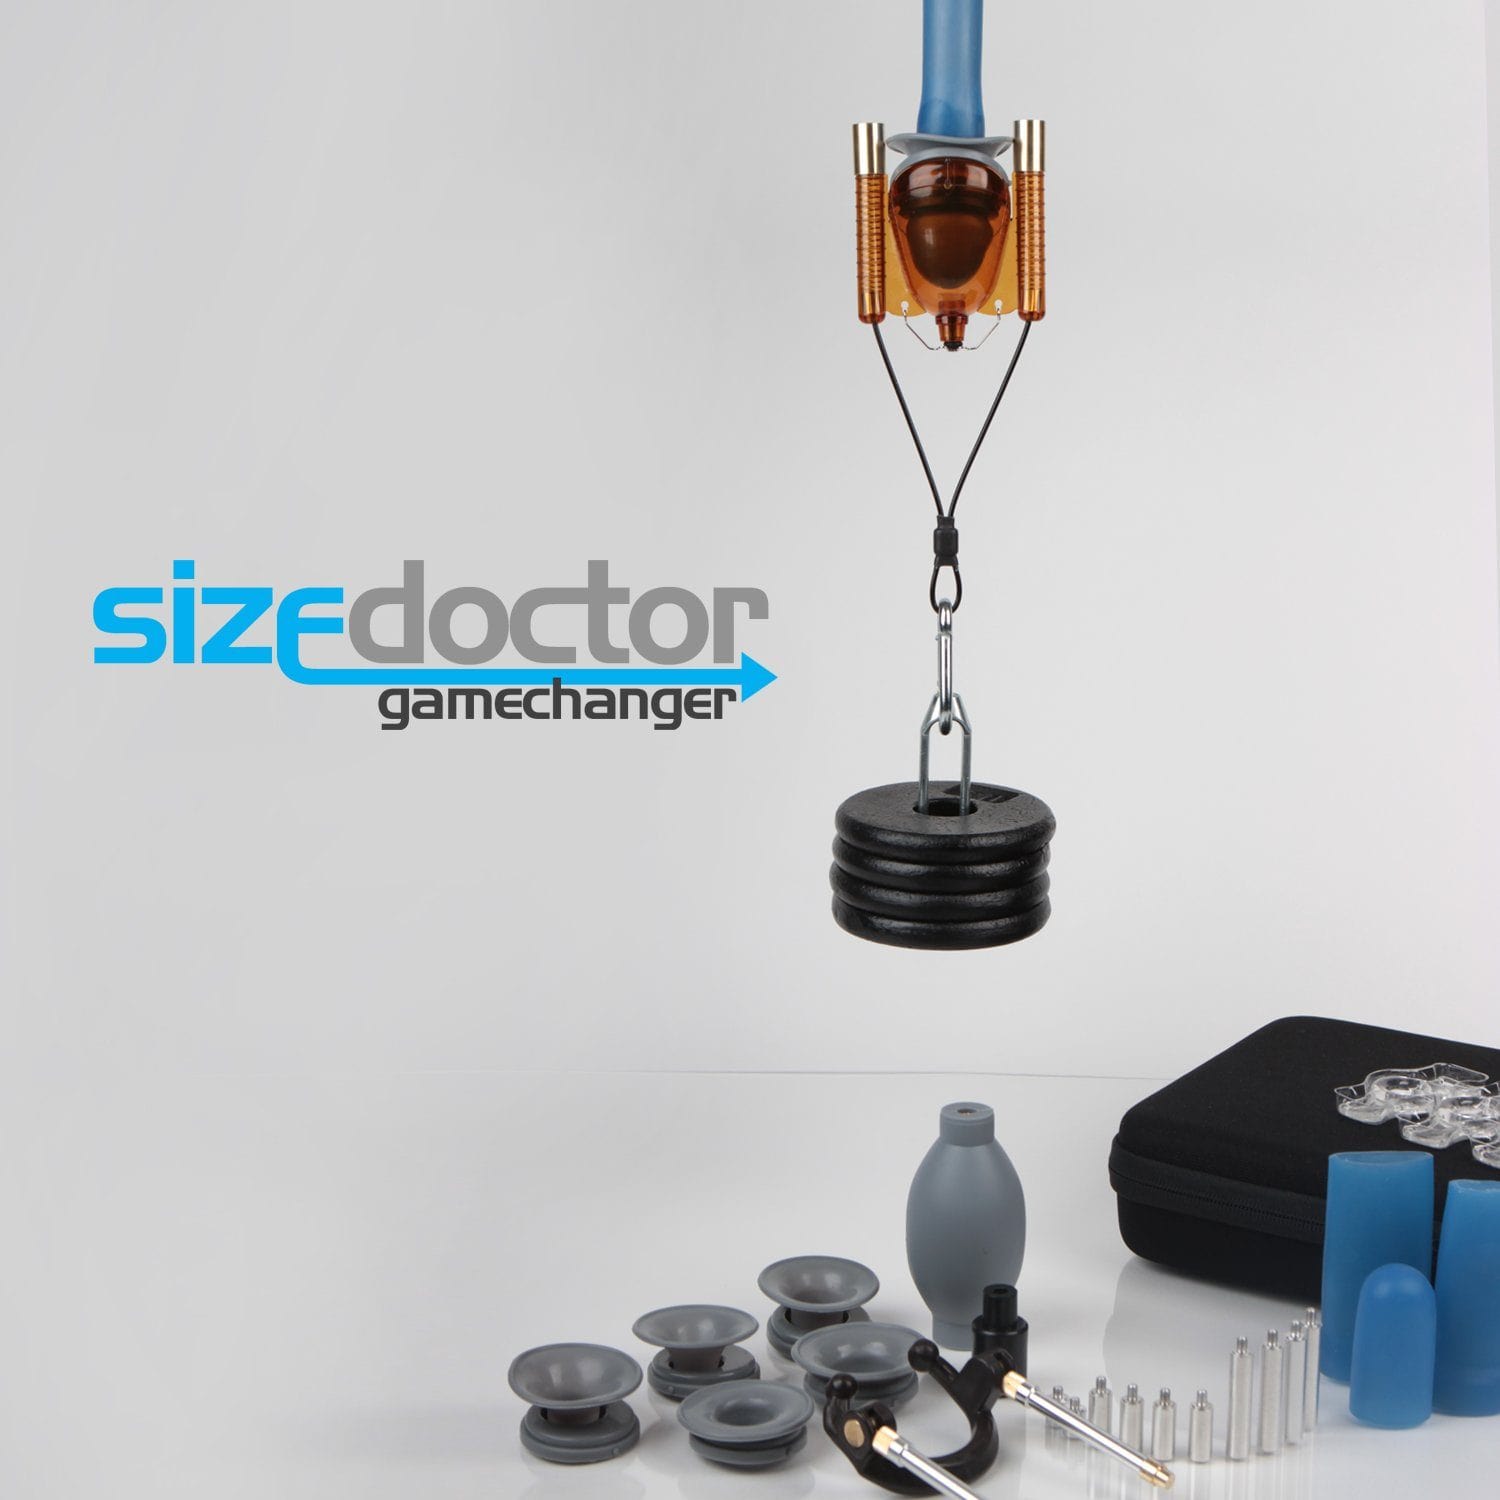 Sizedoctor Penis Extender